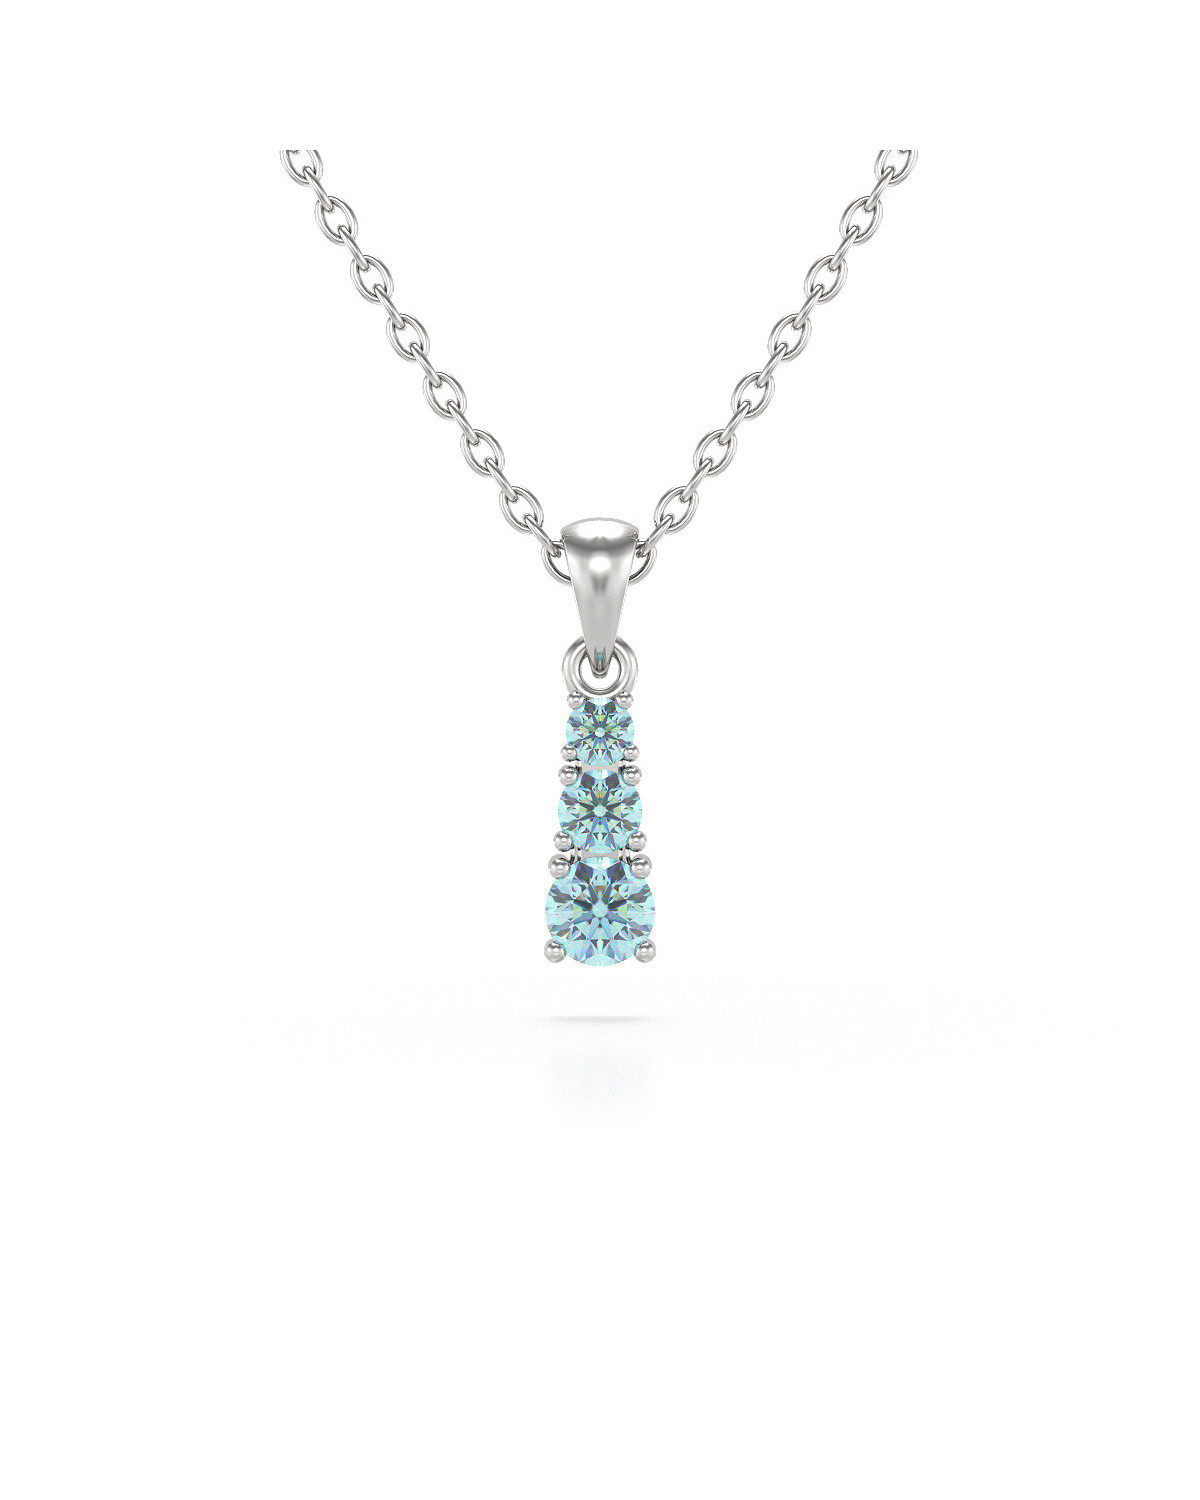 925 Silver Aquamarine Necklace Pendant Chain included